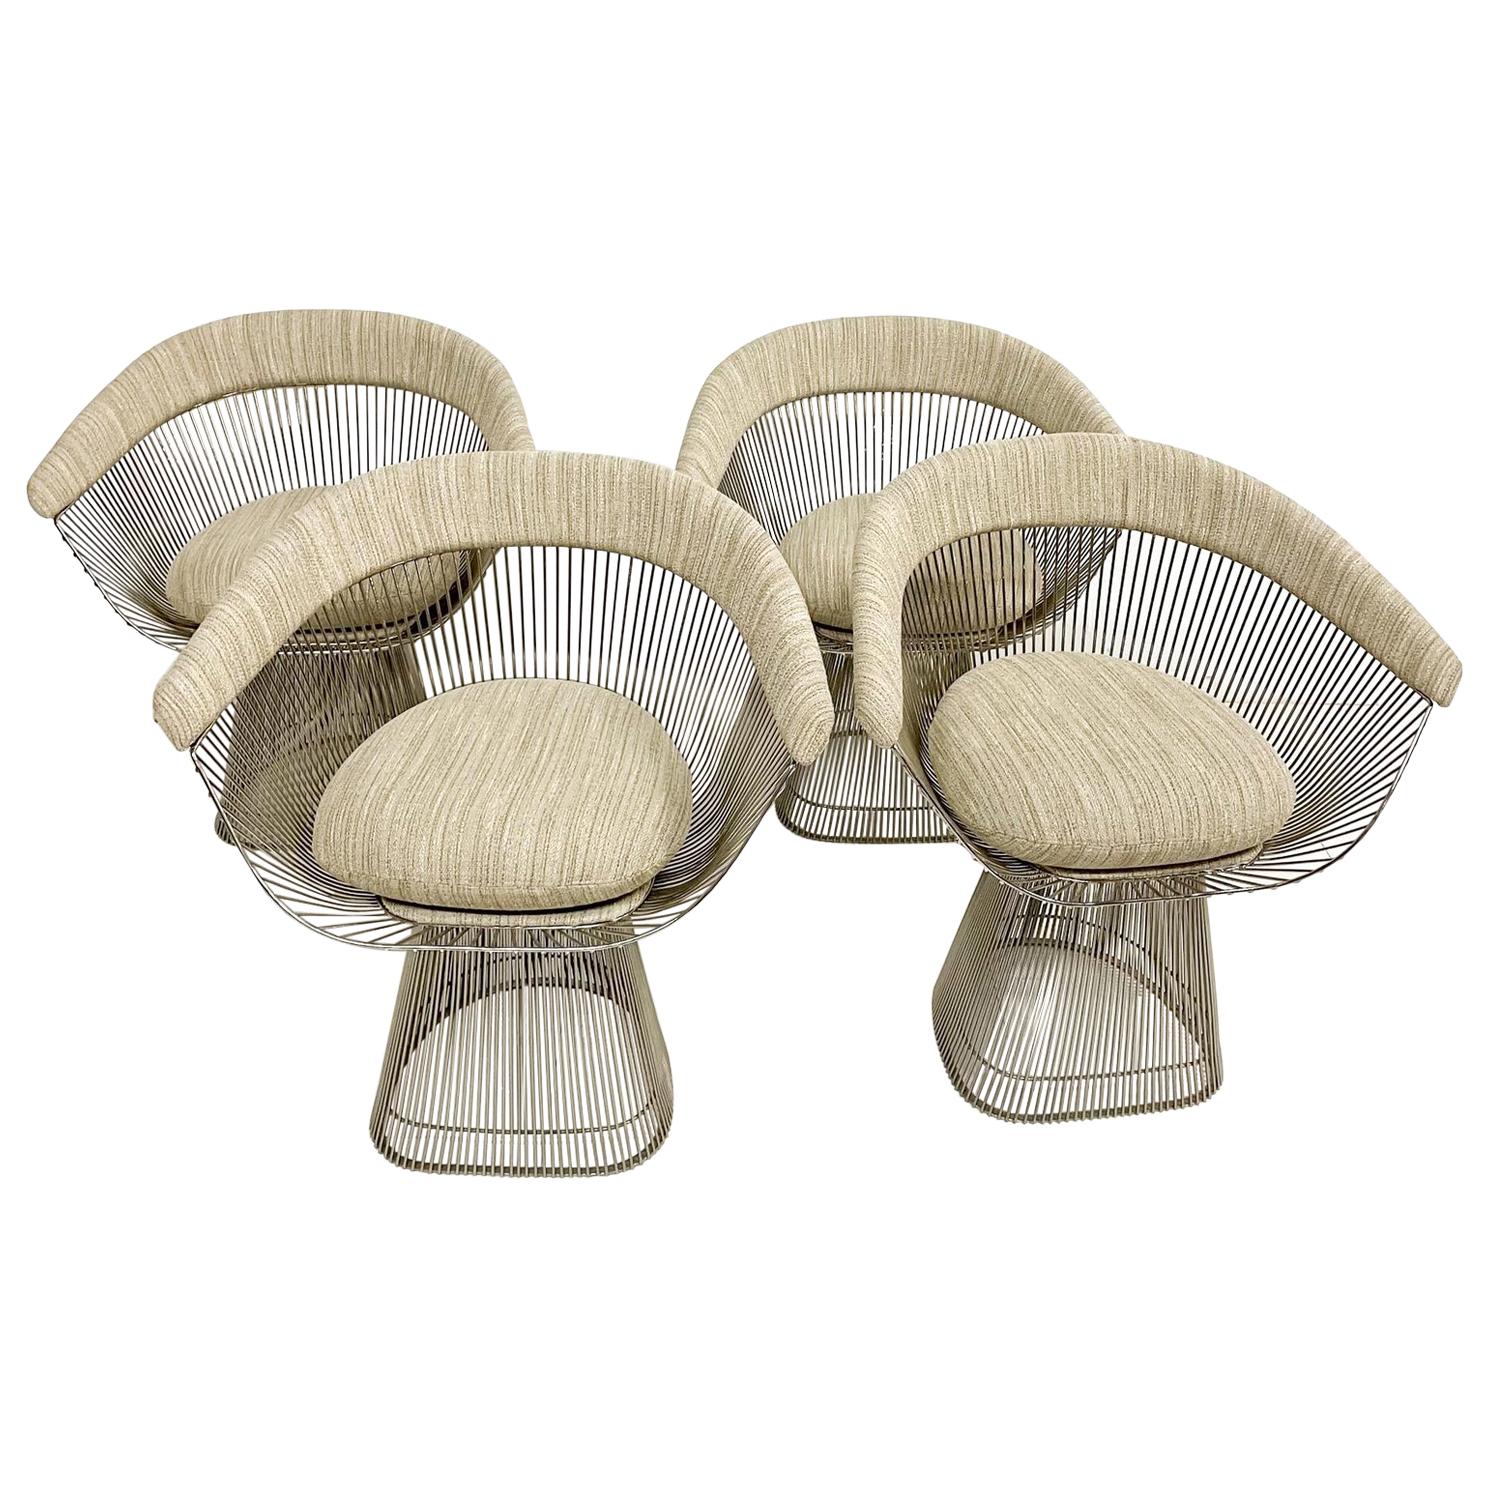 Warren Platner Curved Wire Dining Chairs for Knoll 1960s Sculptural Modernism